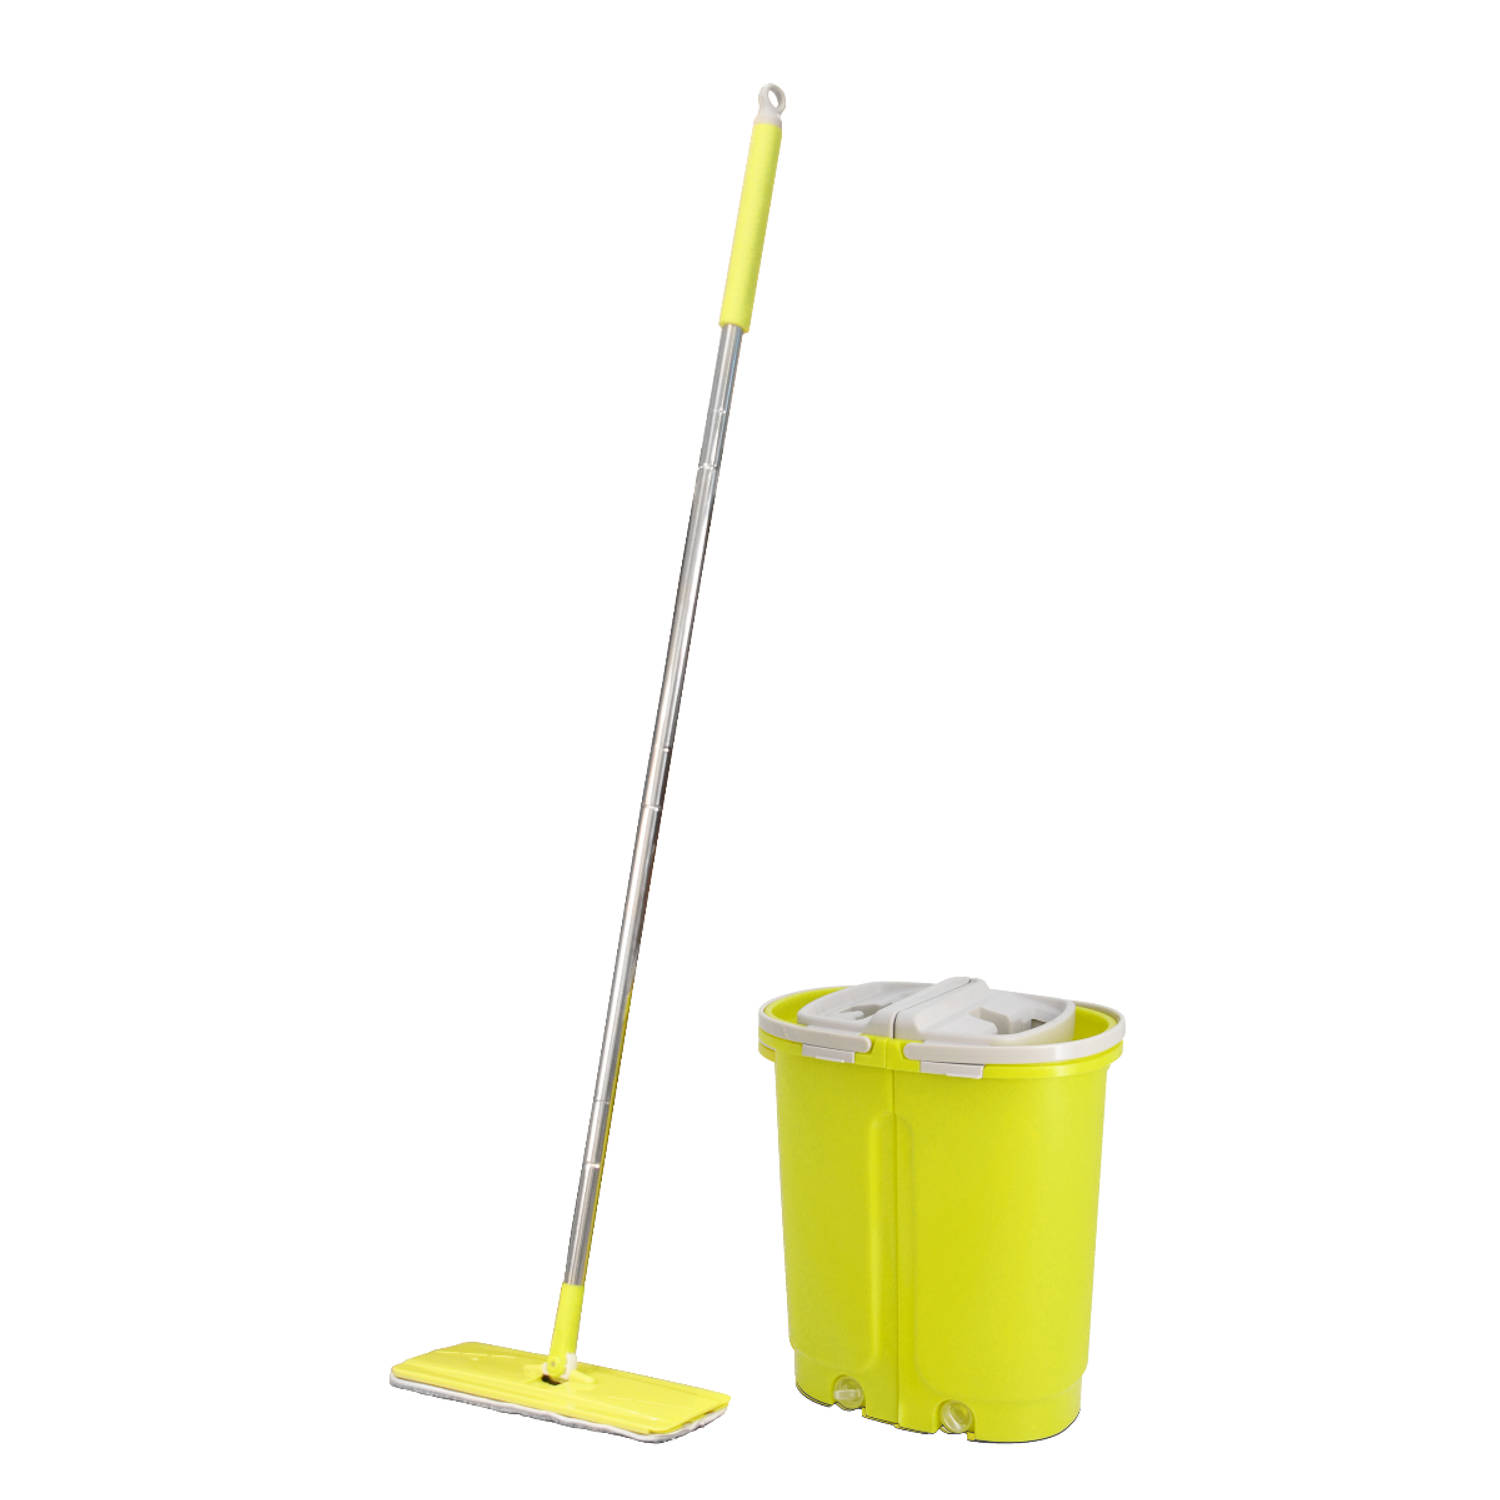 Mollys Marvelous Flat Mop Cleaning Device